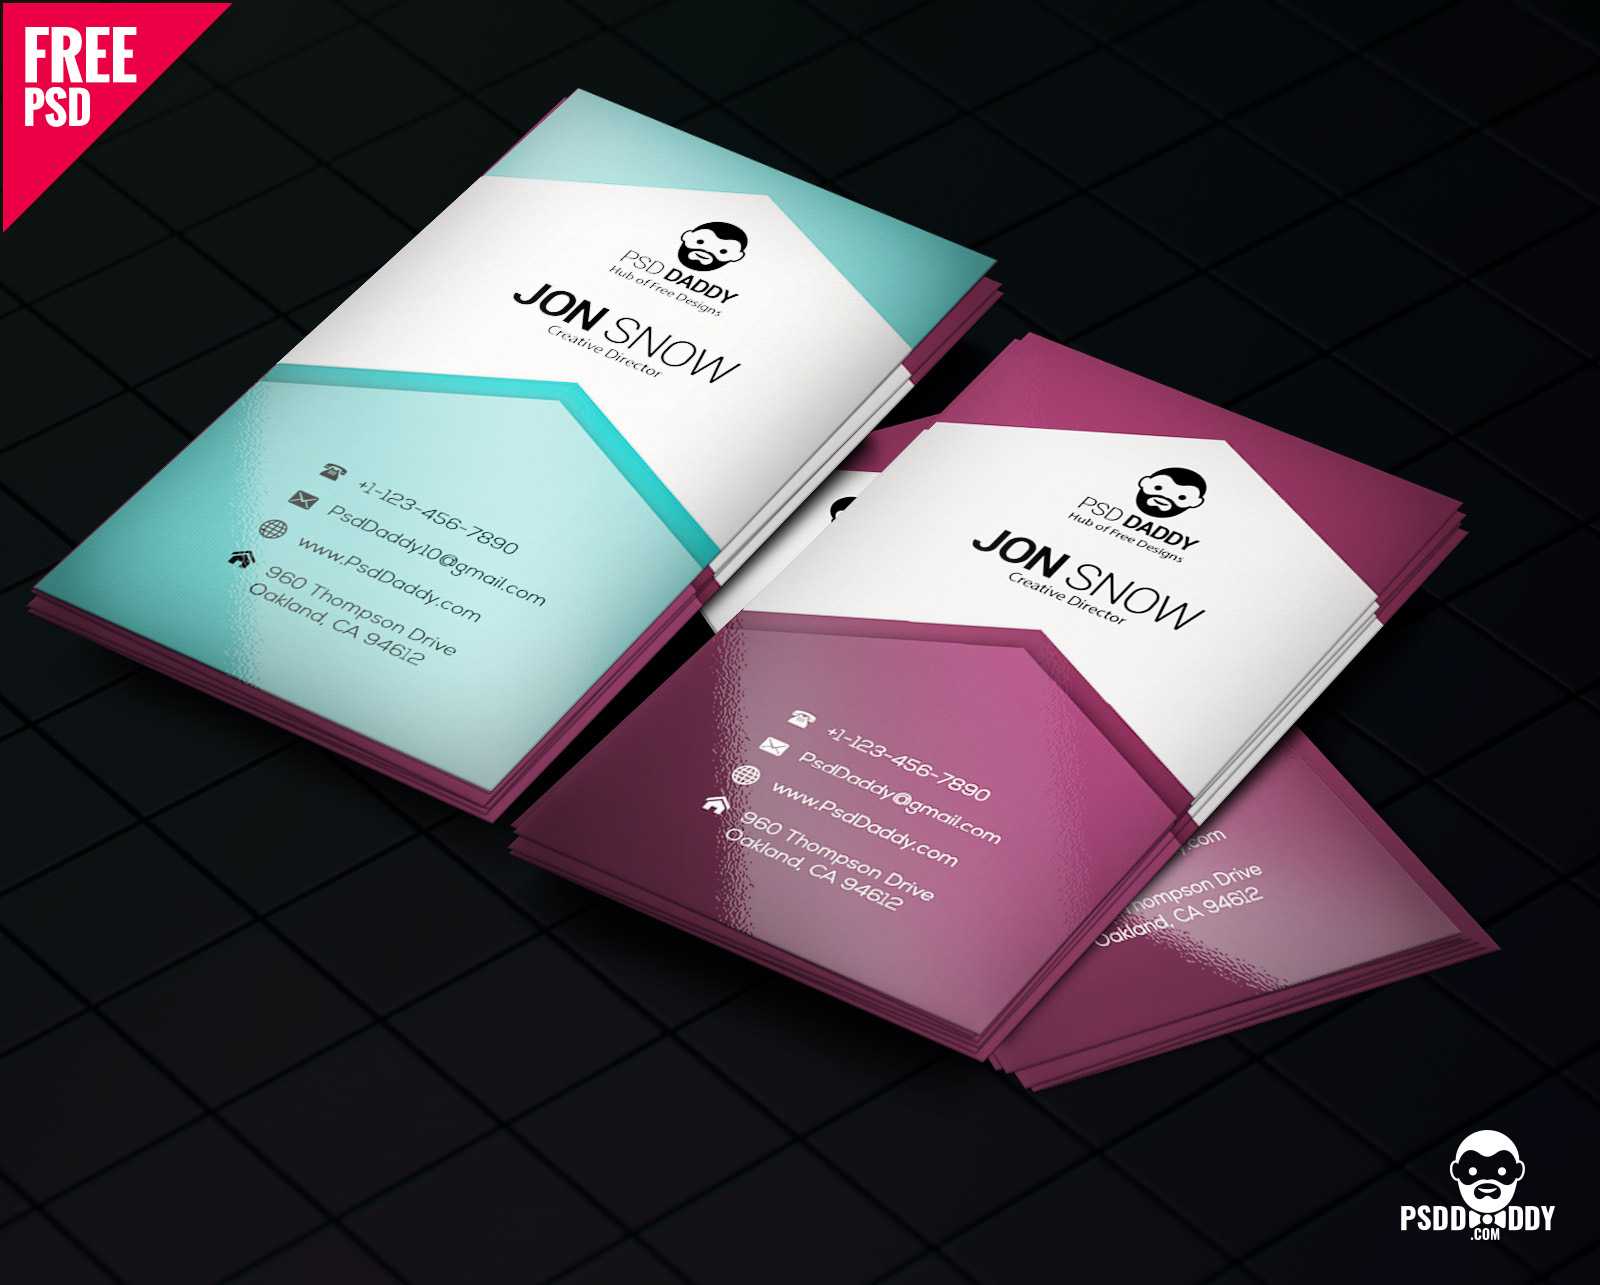 Download]Creative Business Card Psd Free | Psddaddy With Regard To Business Card Size Template Psd